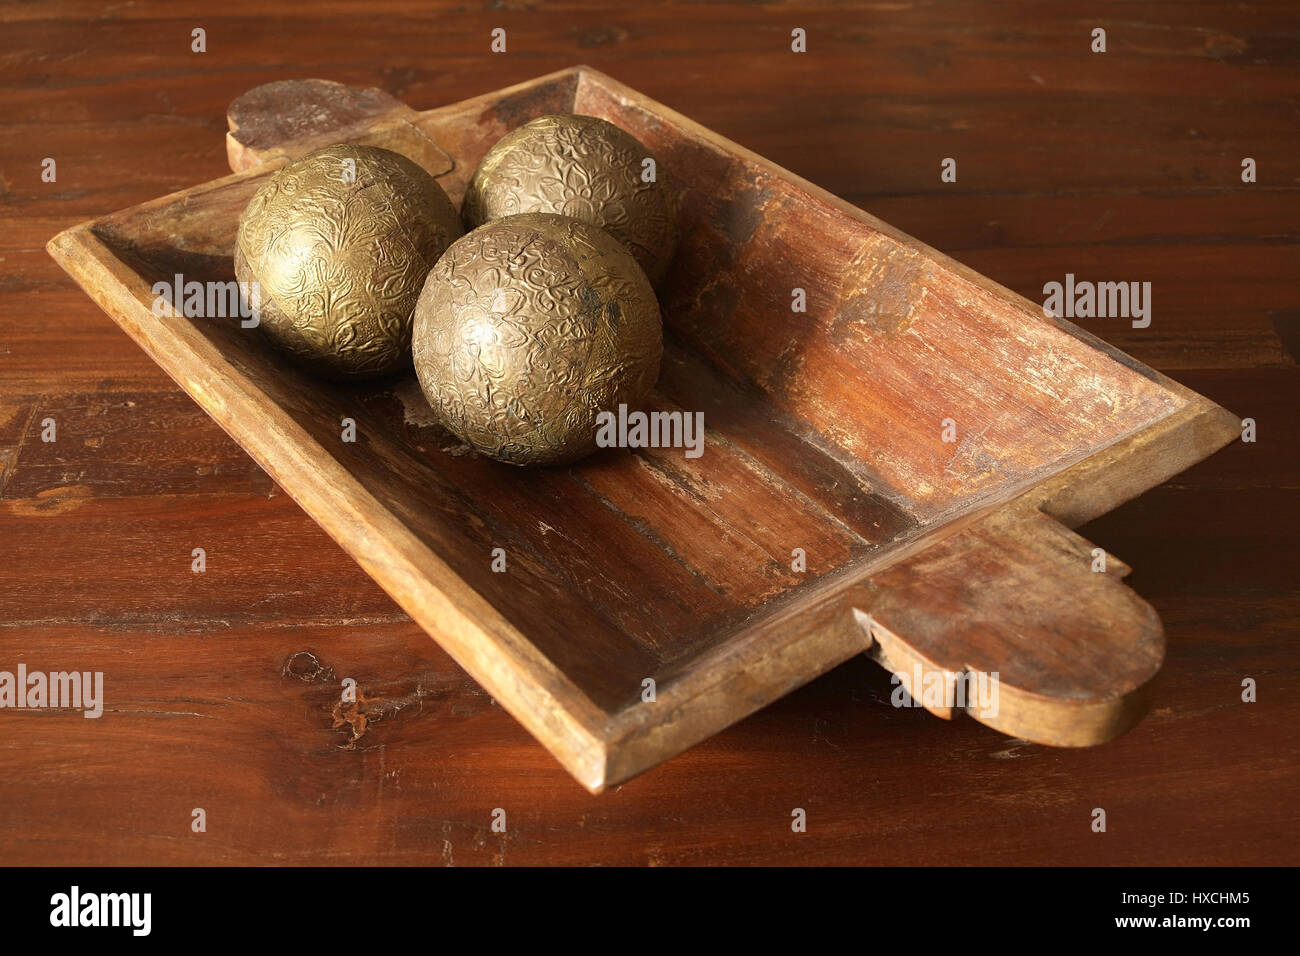 Wooden bowl with balls, Holzschale mit Kugeln Stock Photo